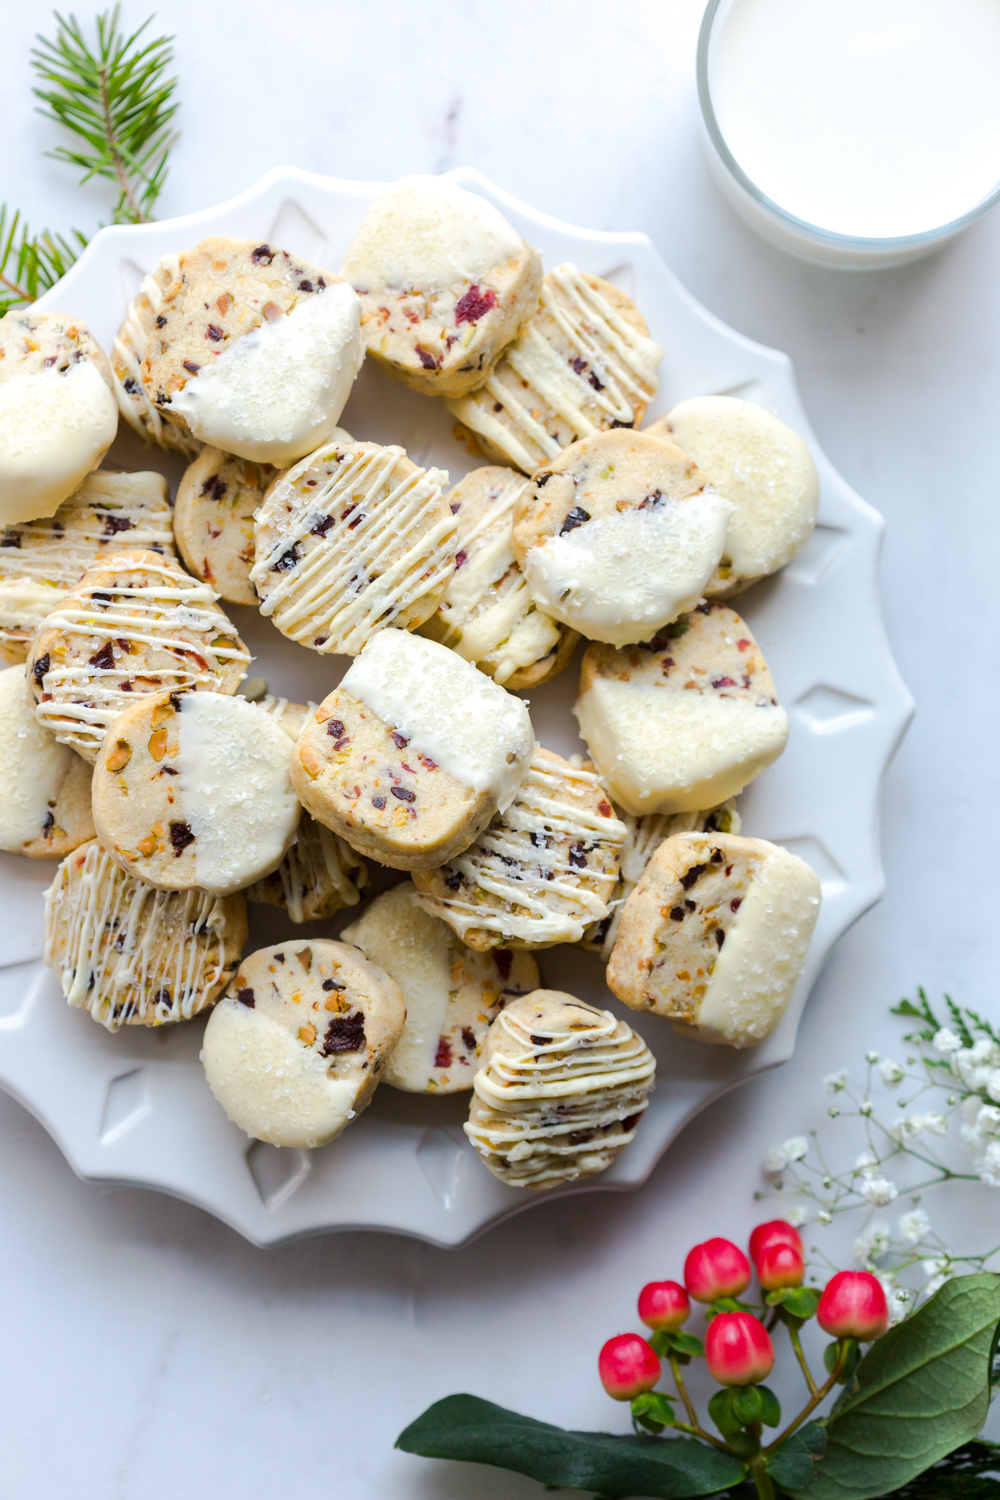 Plateful of Cherry Pistachio and White Chocolate Shortbread Cookies